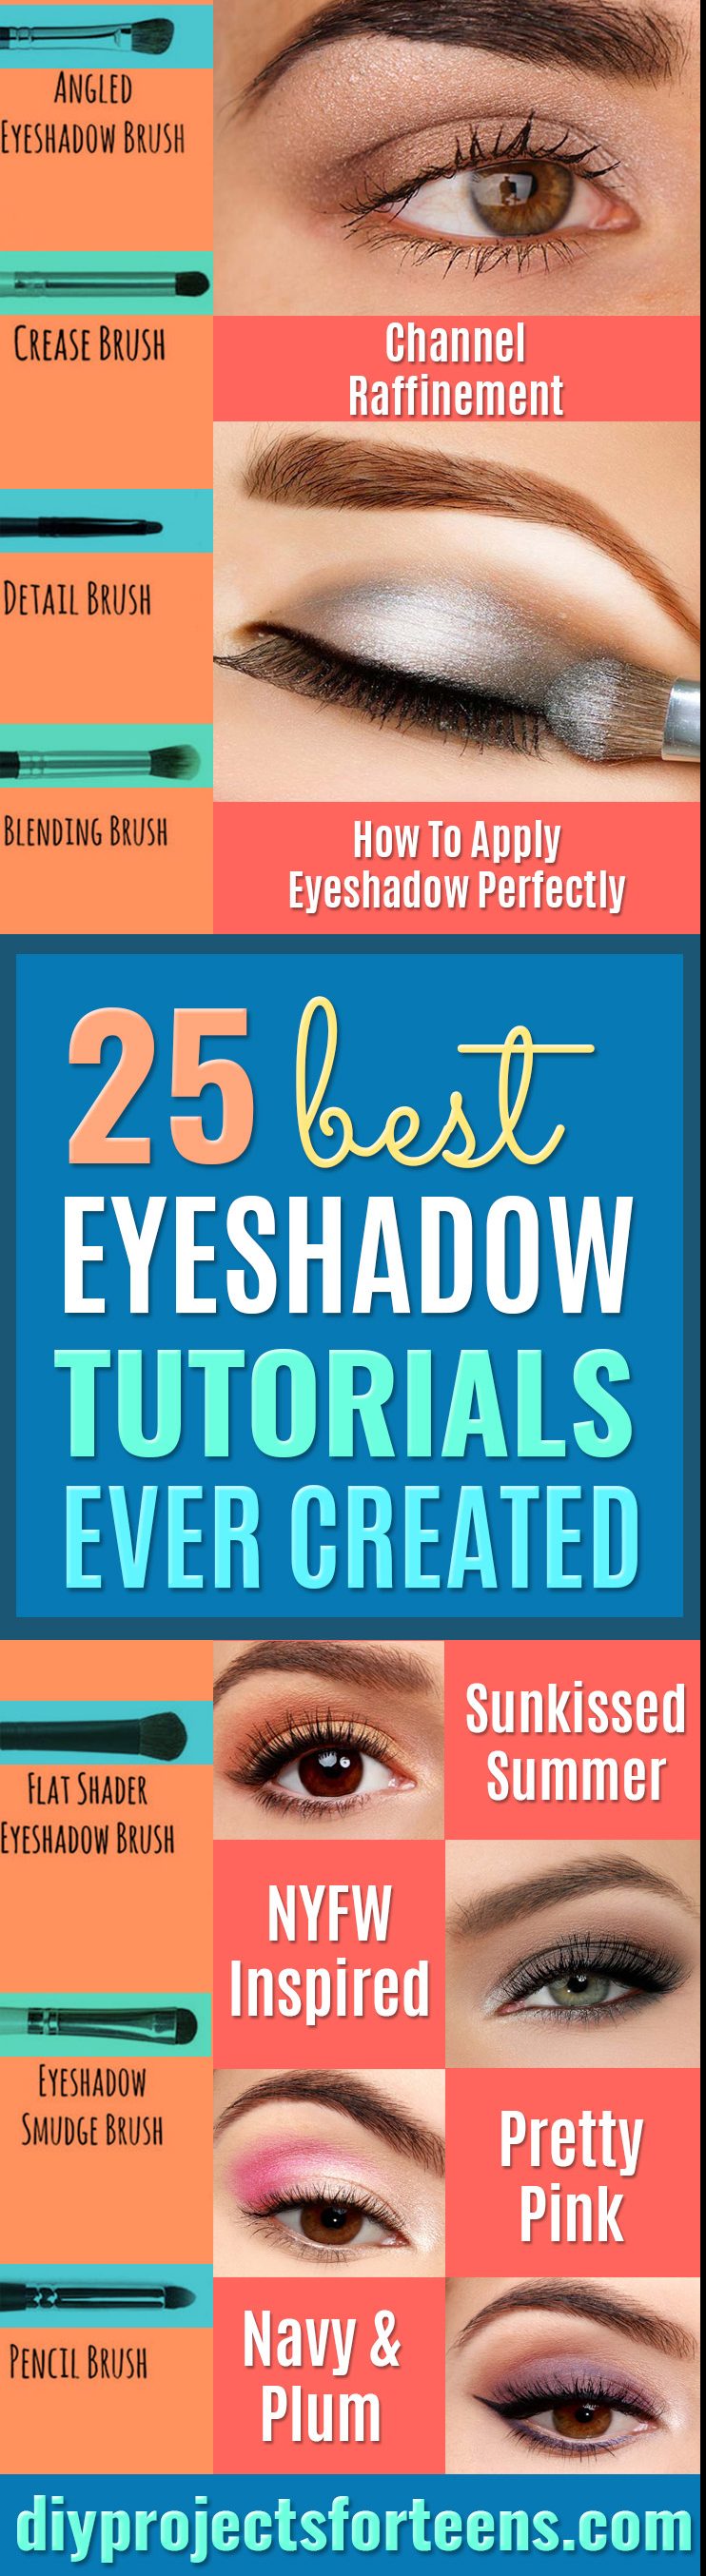 Best Eyeshadow Tutorials - Easy Step by Step How To For Eye Shadow - Cool Makeup Tricks and Eye Makeup Tutorial With Instructions - Quick Ways to Do Smoky Eye, Natural Makeup, Looks for Day and Evening, Brown and Blue Eyes - Cool Ideas for Beginners and Teens